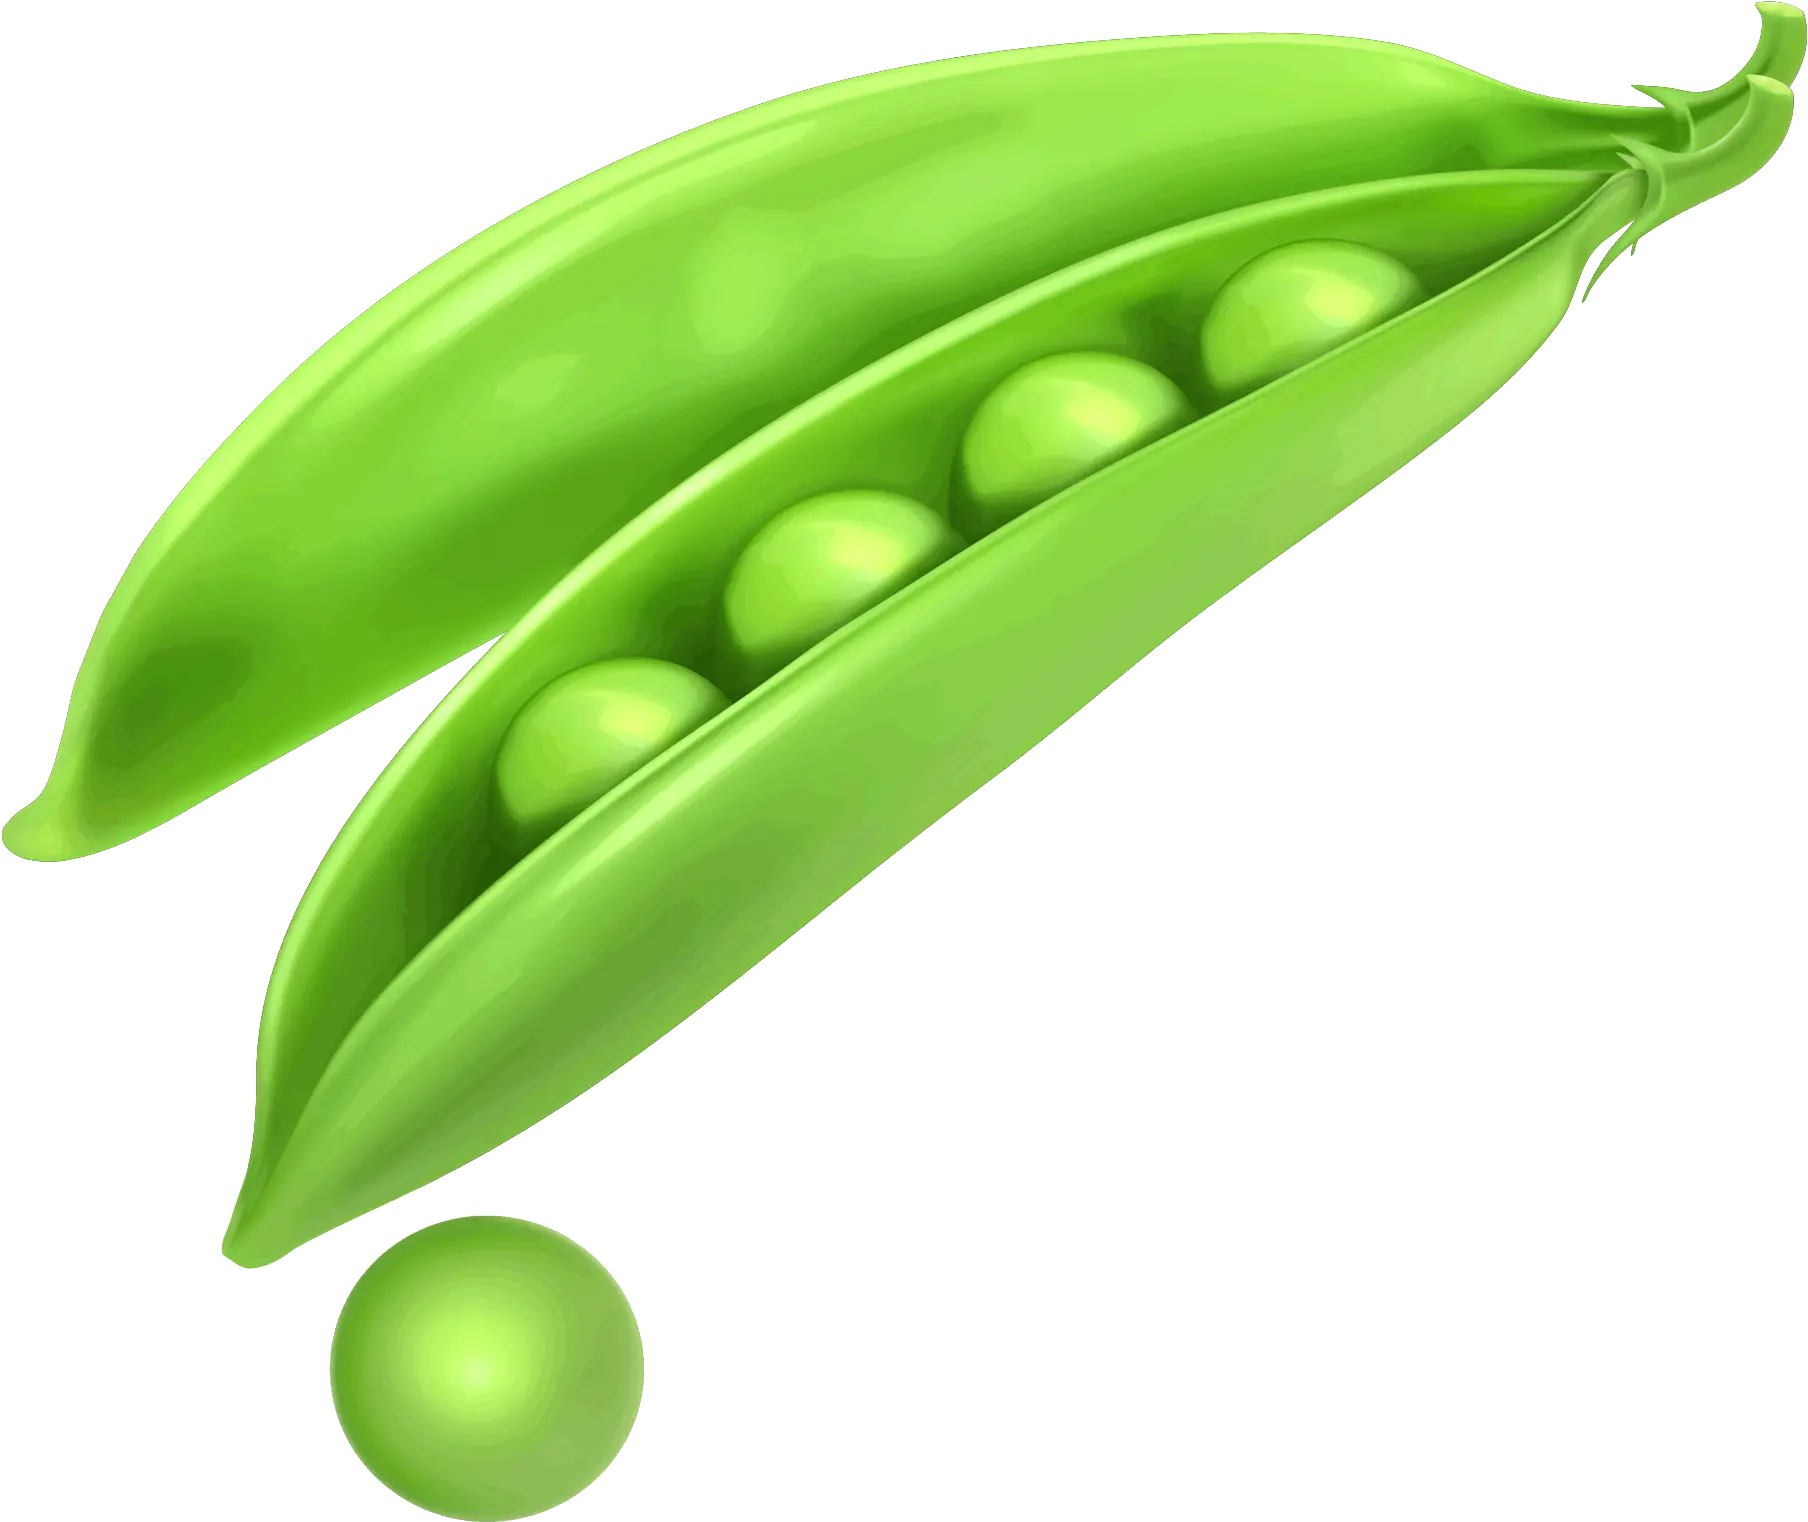 Peas Png Image Free Download Searchpng Peas In A Pod Drawing Peas Png